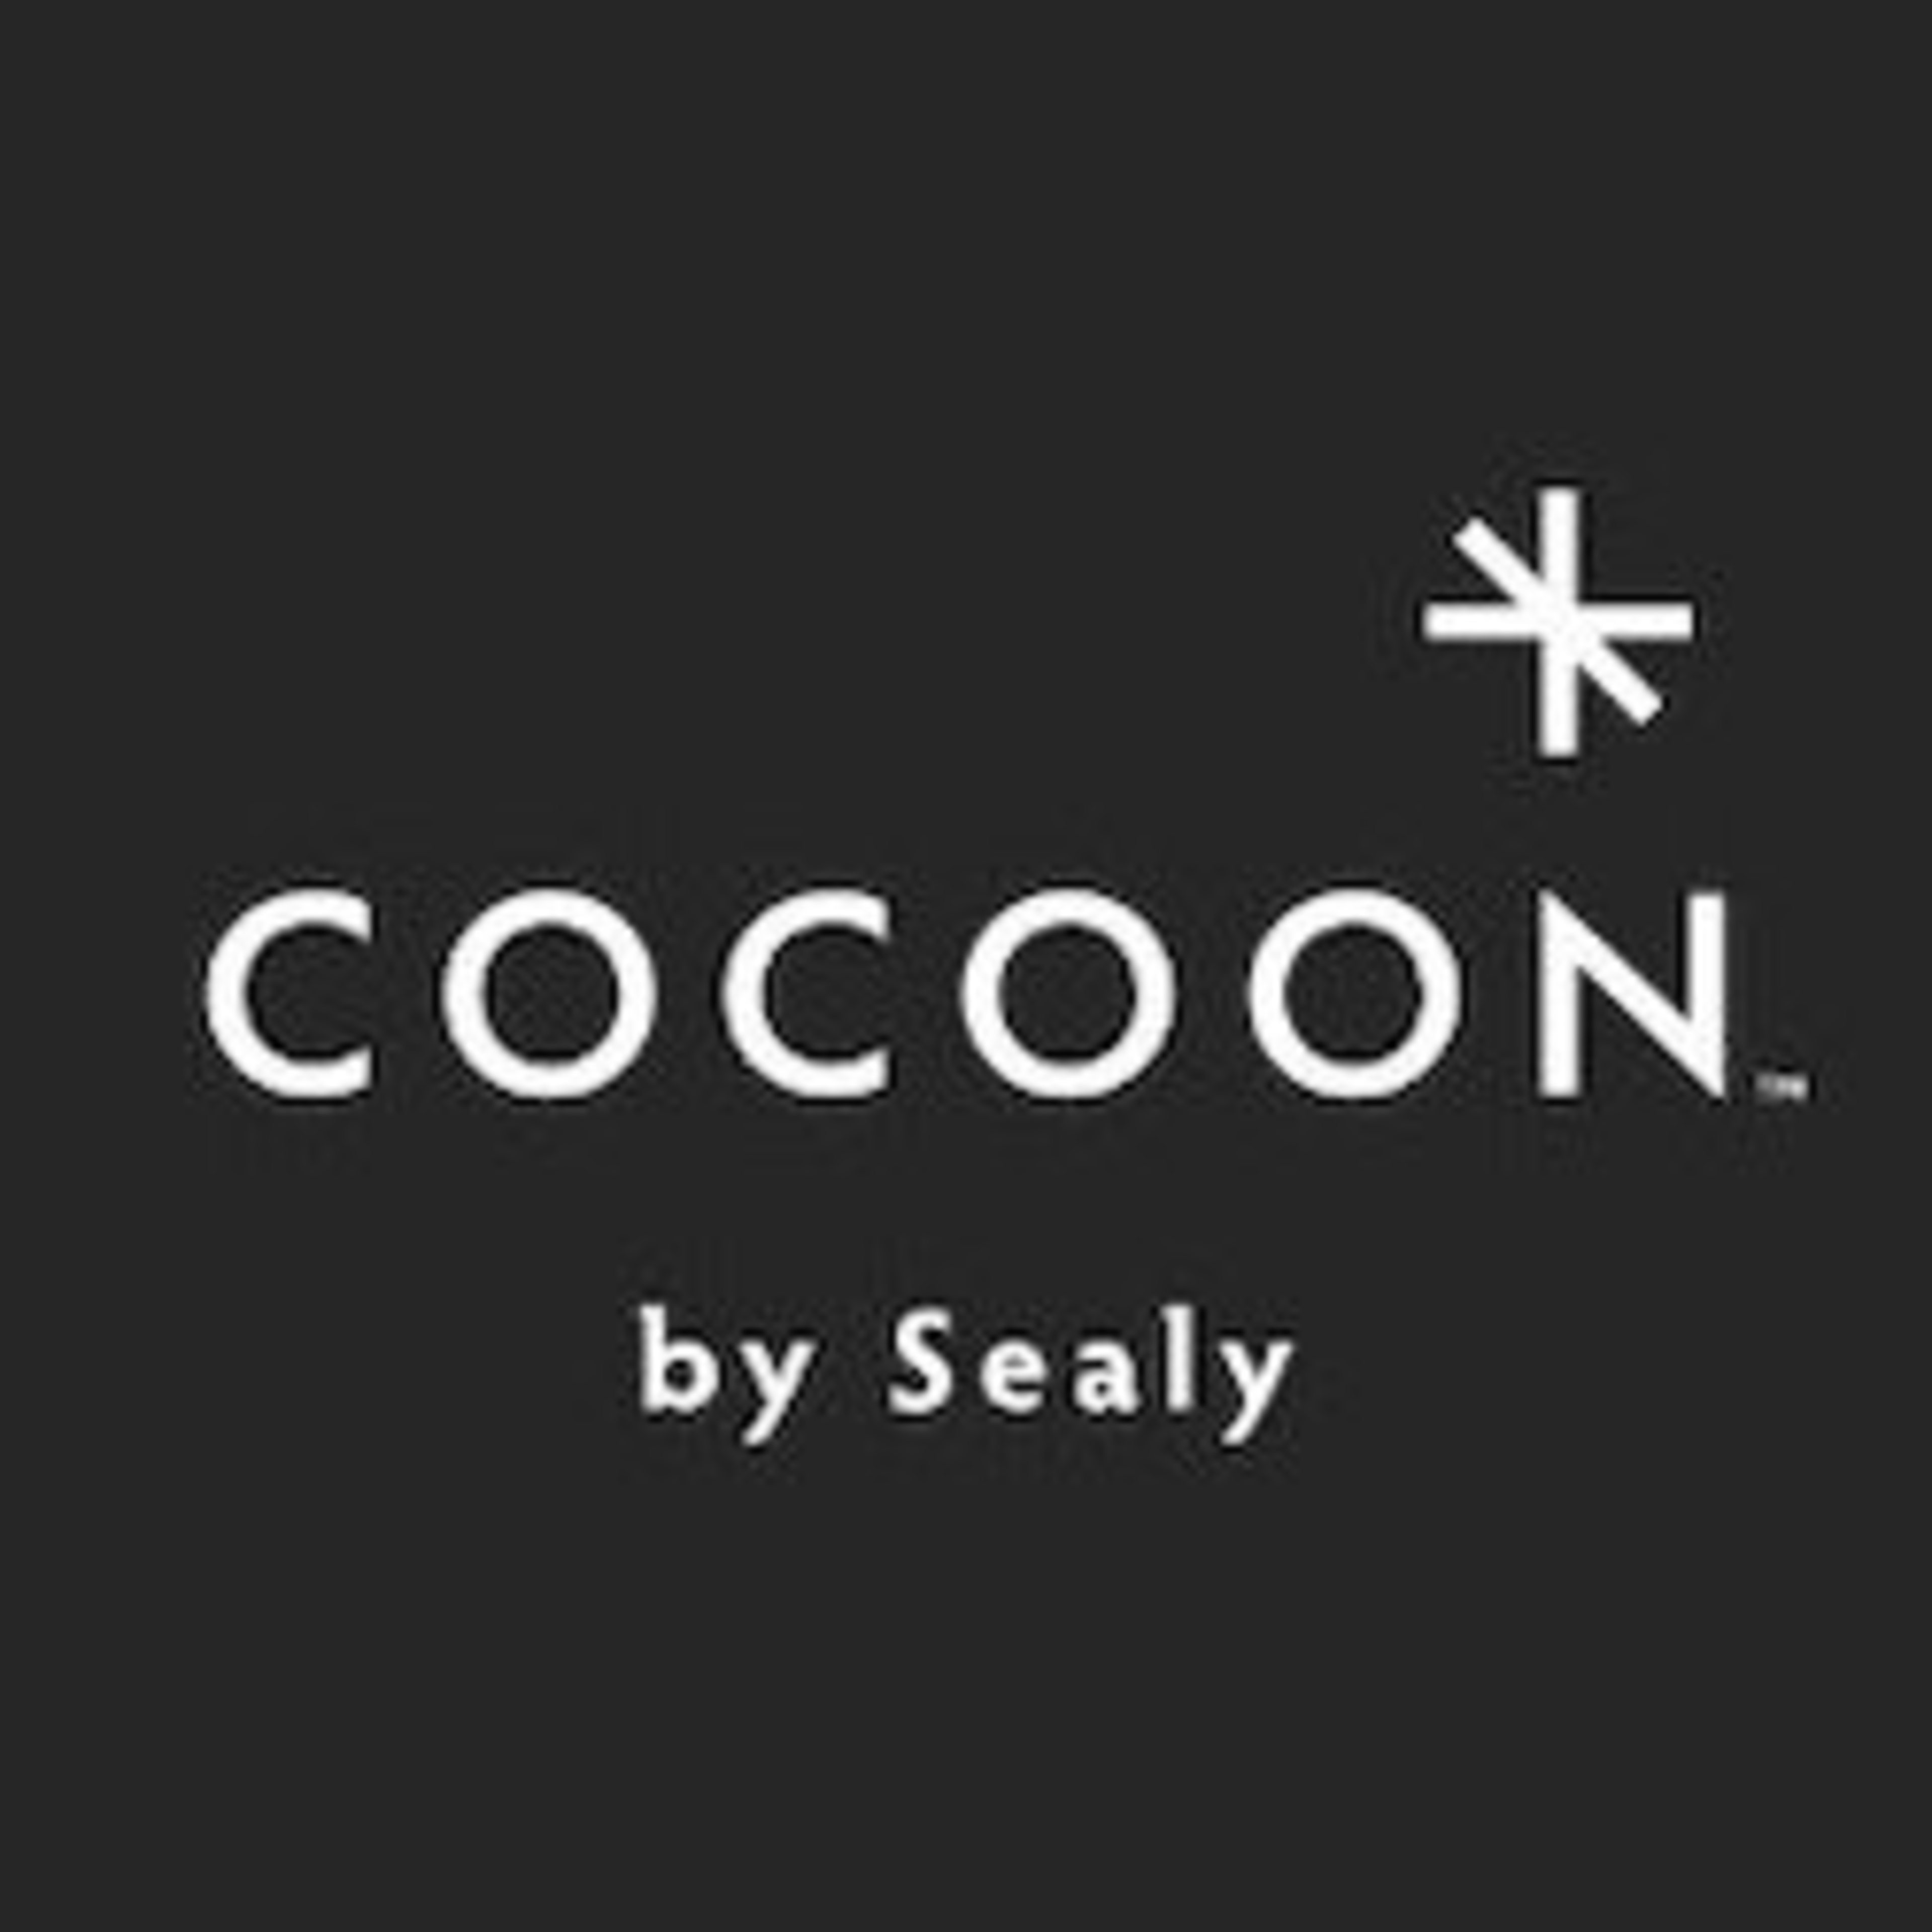 Cocoon by SealyCode